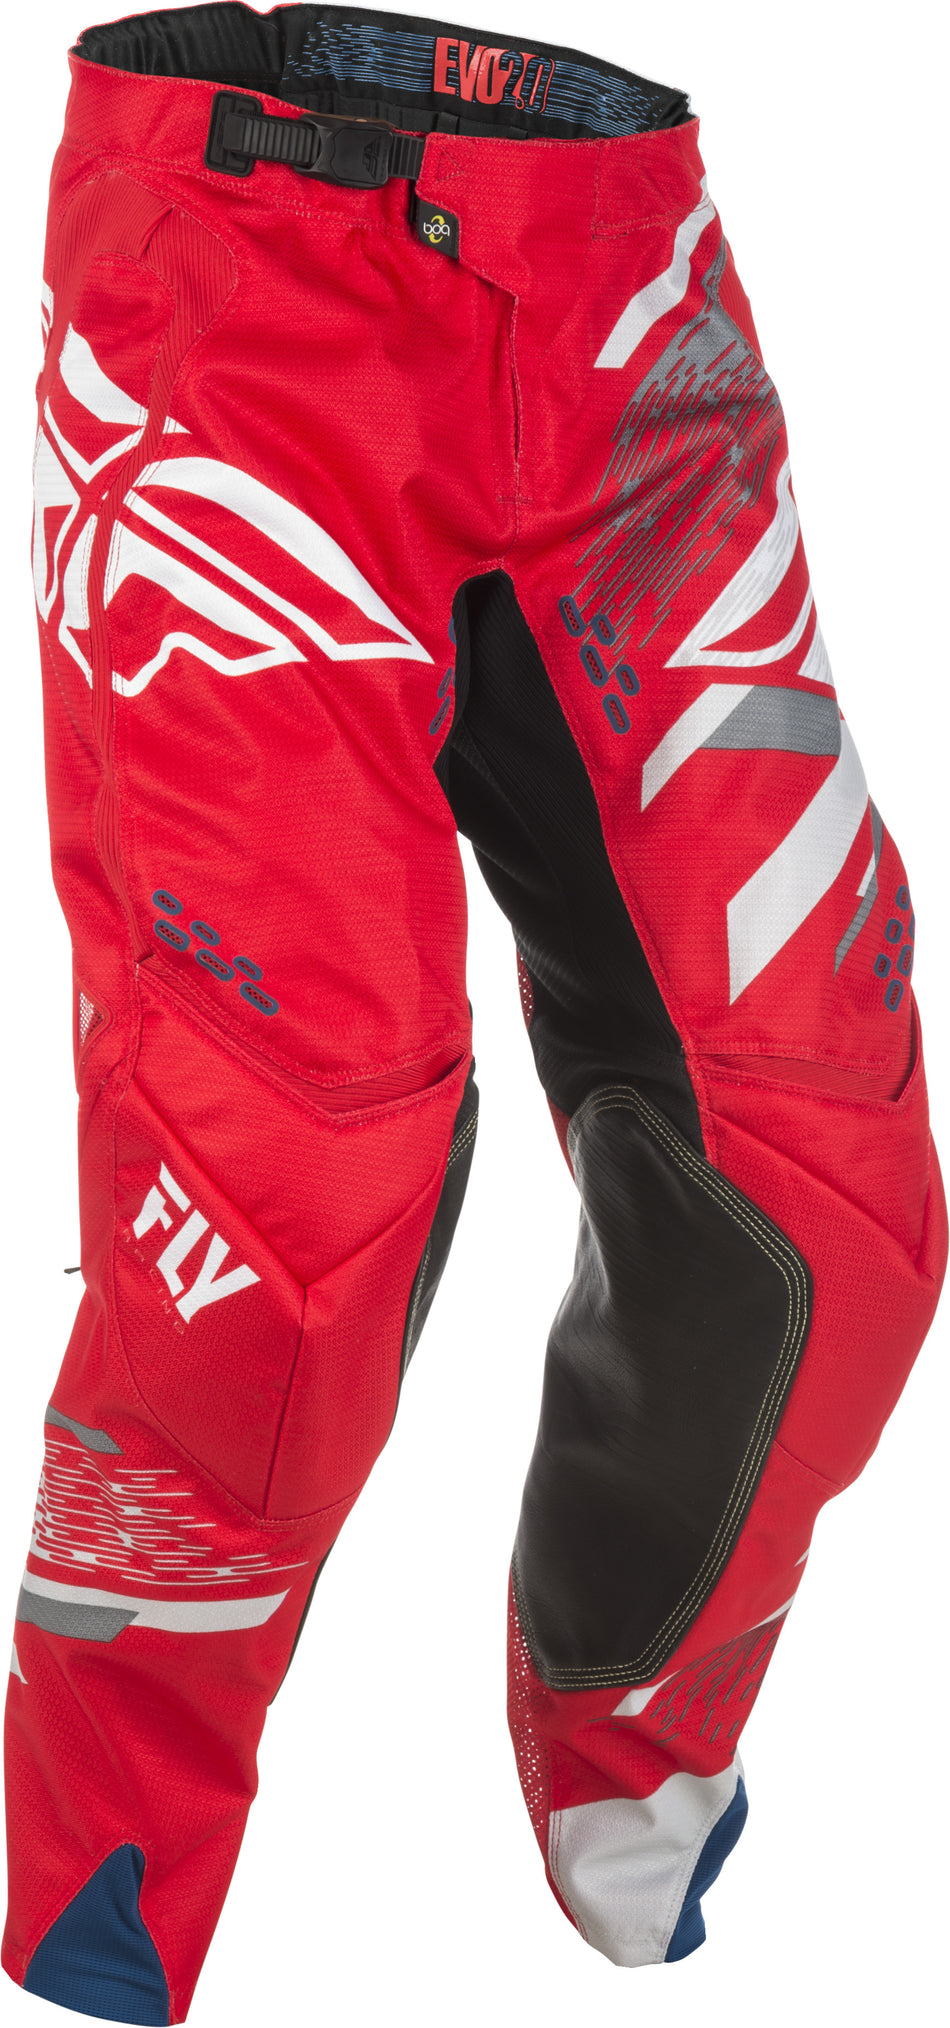 FLY RACING Evolution 2.0 Pants Red/Grey/White Sz 26 371-23226